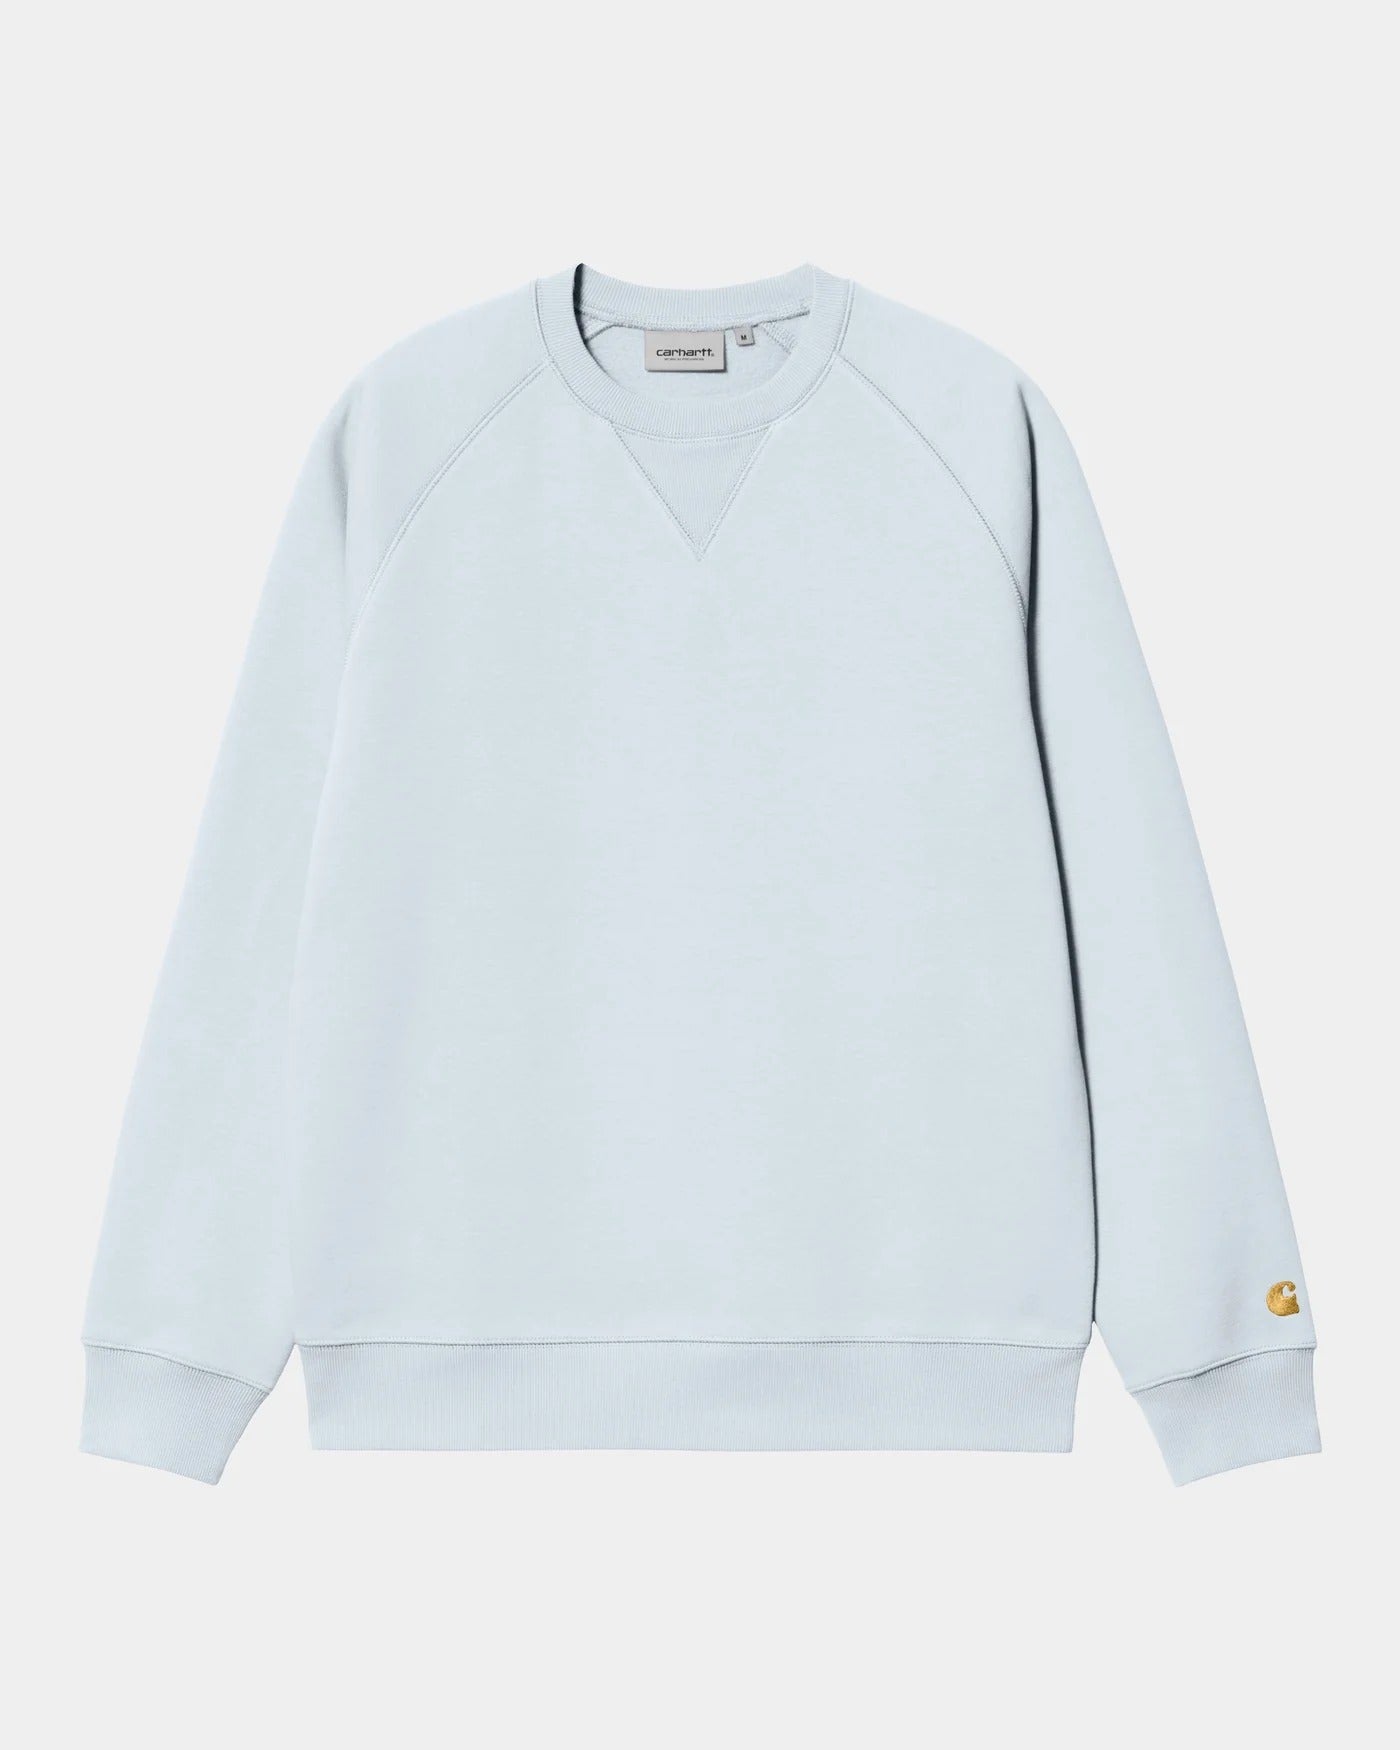 Carhartt WIP Chase Sweat in Icarus/Gold